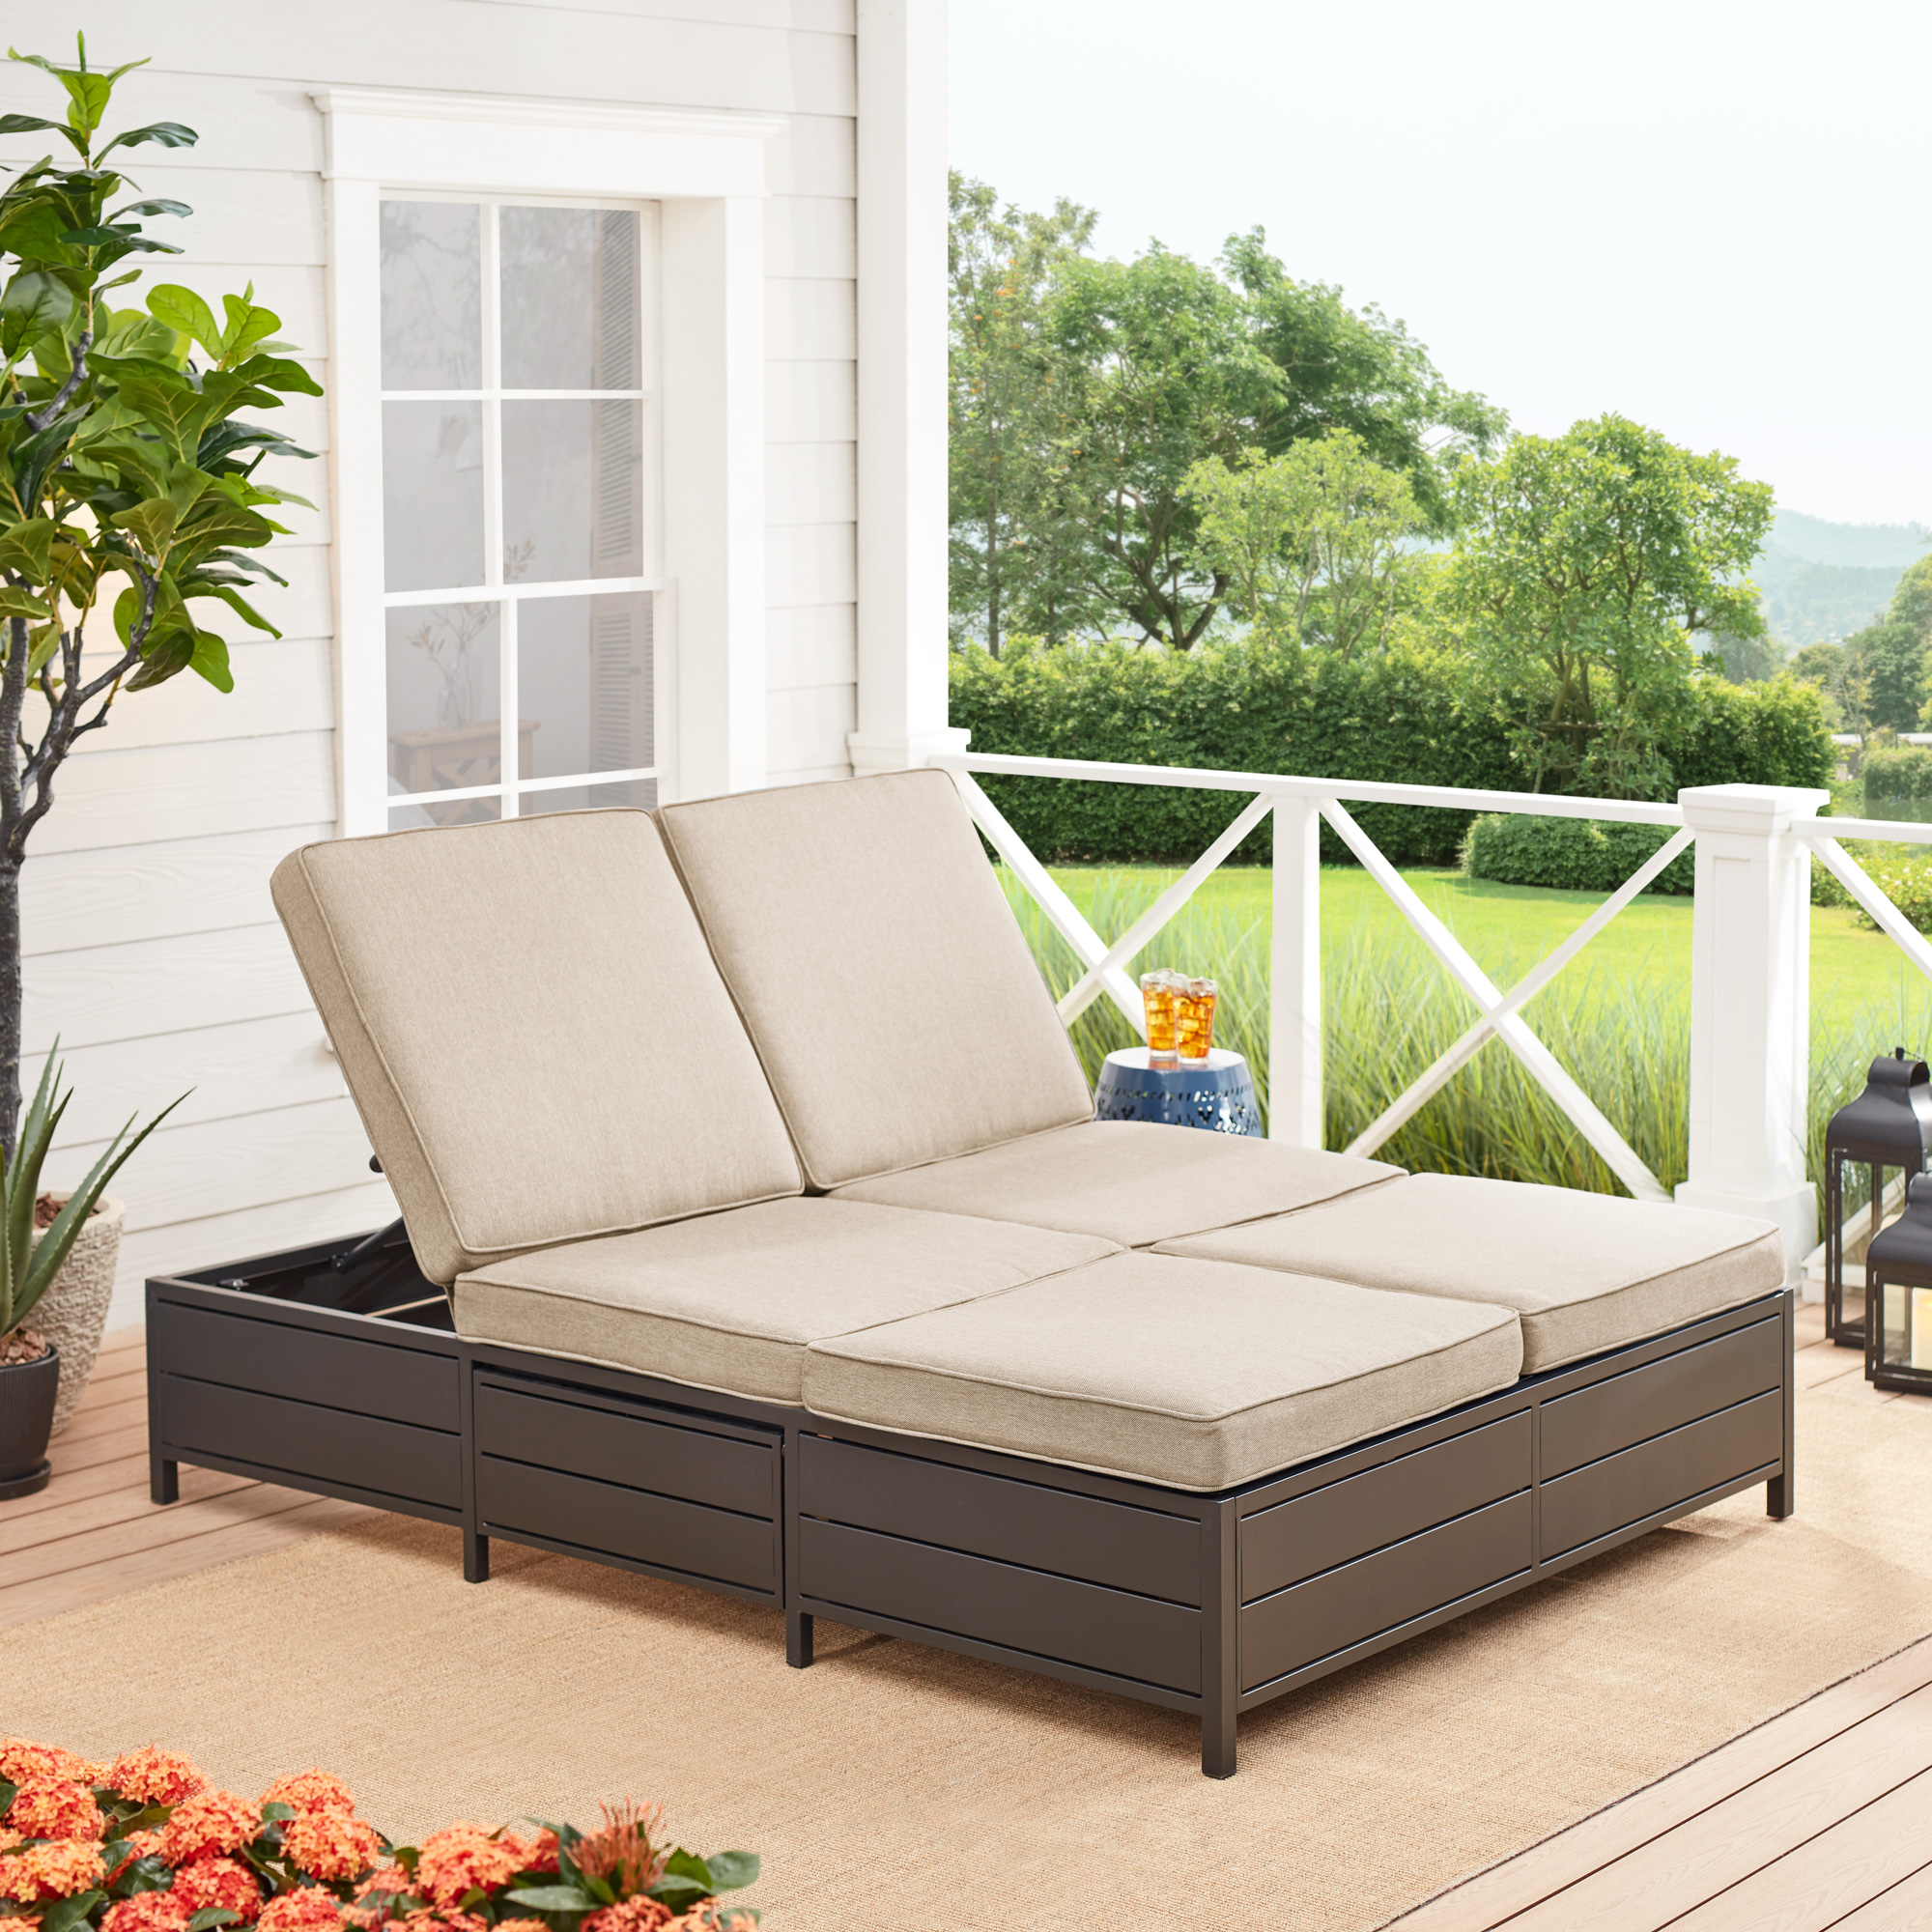 Mainstays Cushion Steel Outdoor Chaise Lounge - Tan/Black - image 1 of 5